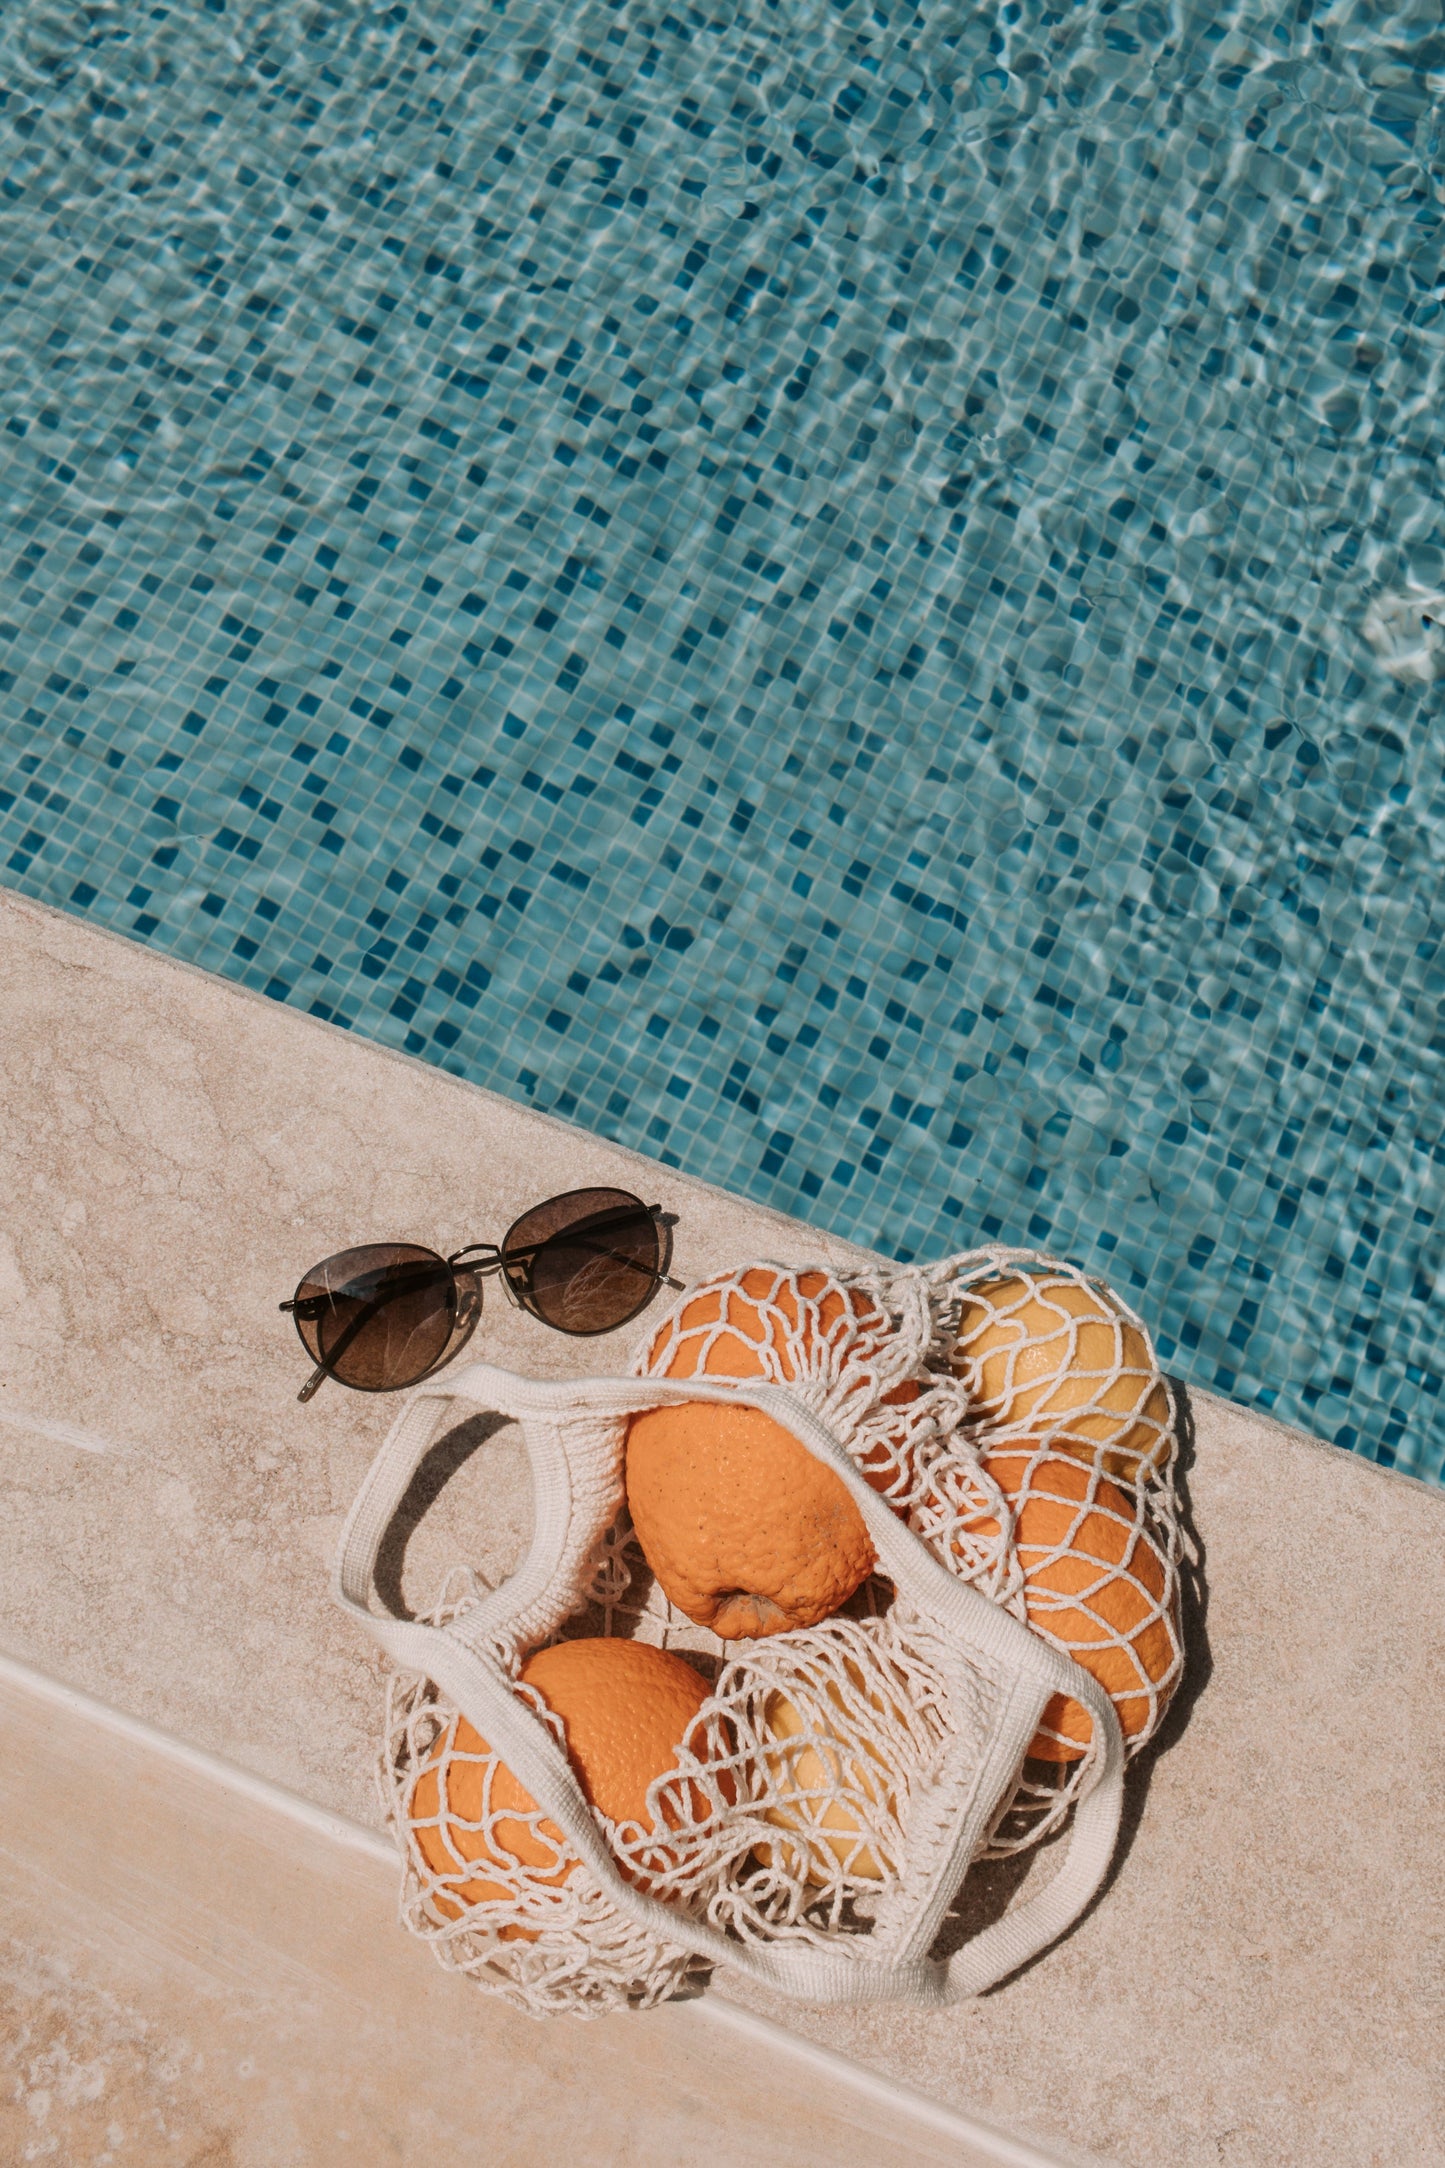 Oranges By the Pool